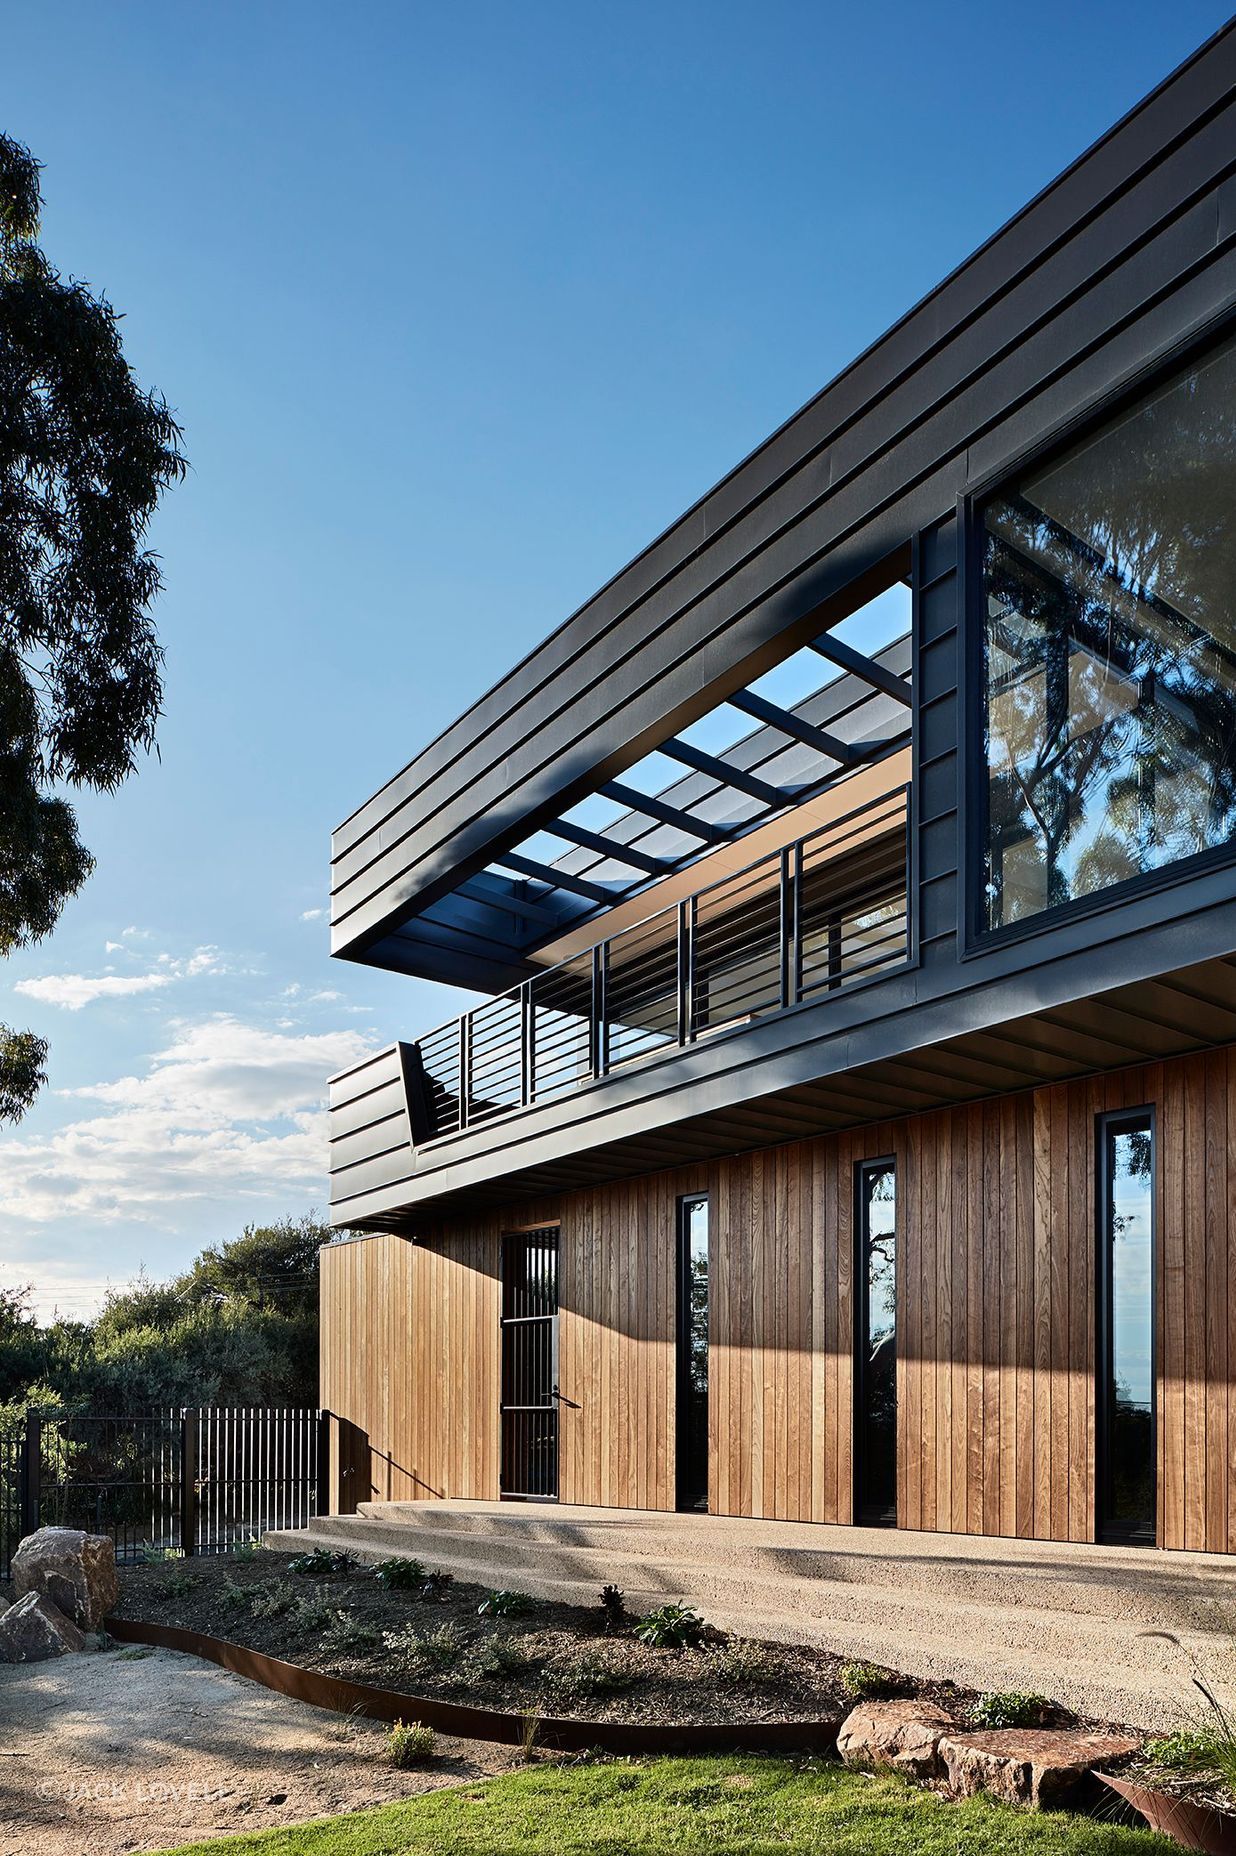 The solid timber cladding of the lower floor provides a base for the open air balcony above.